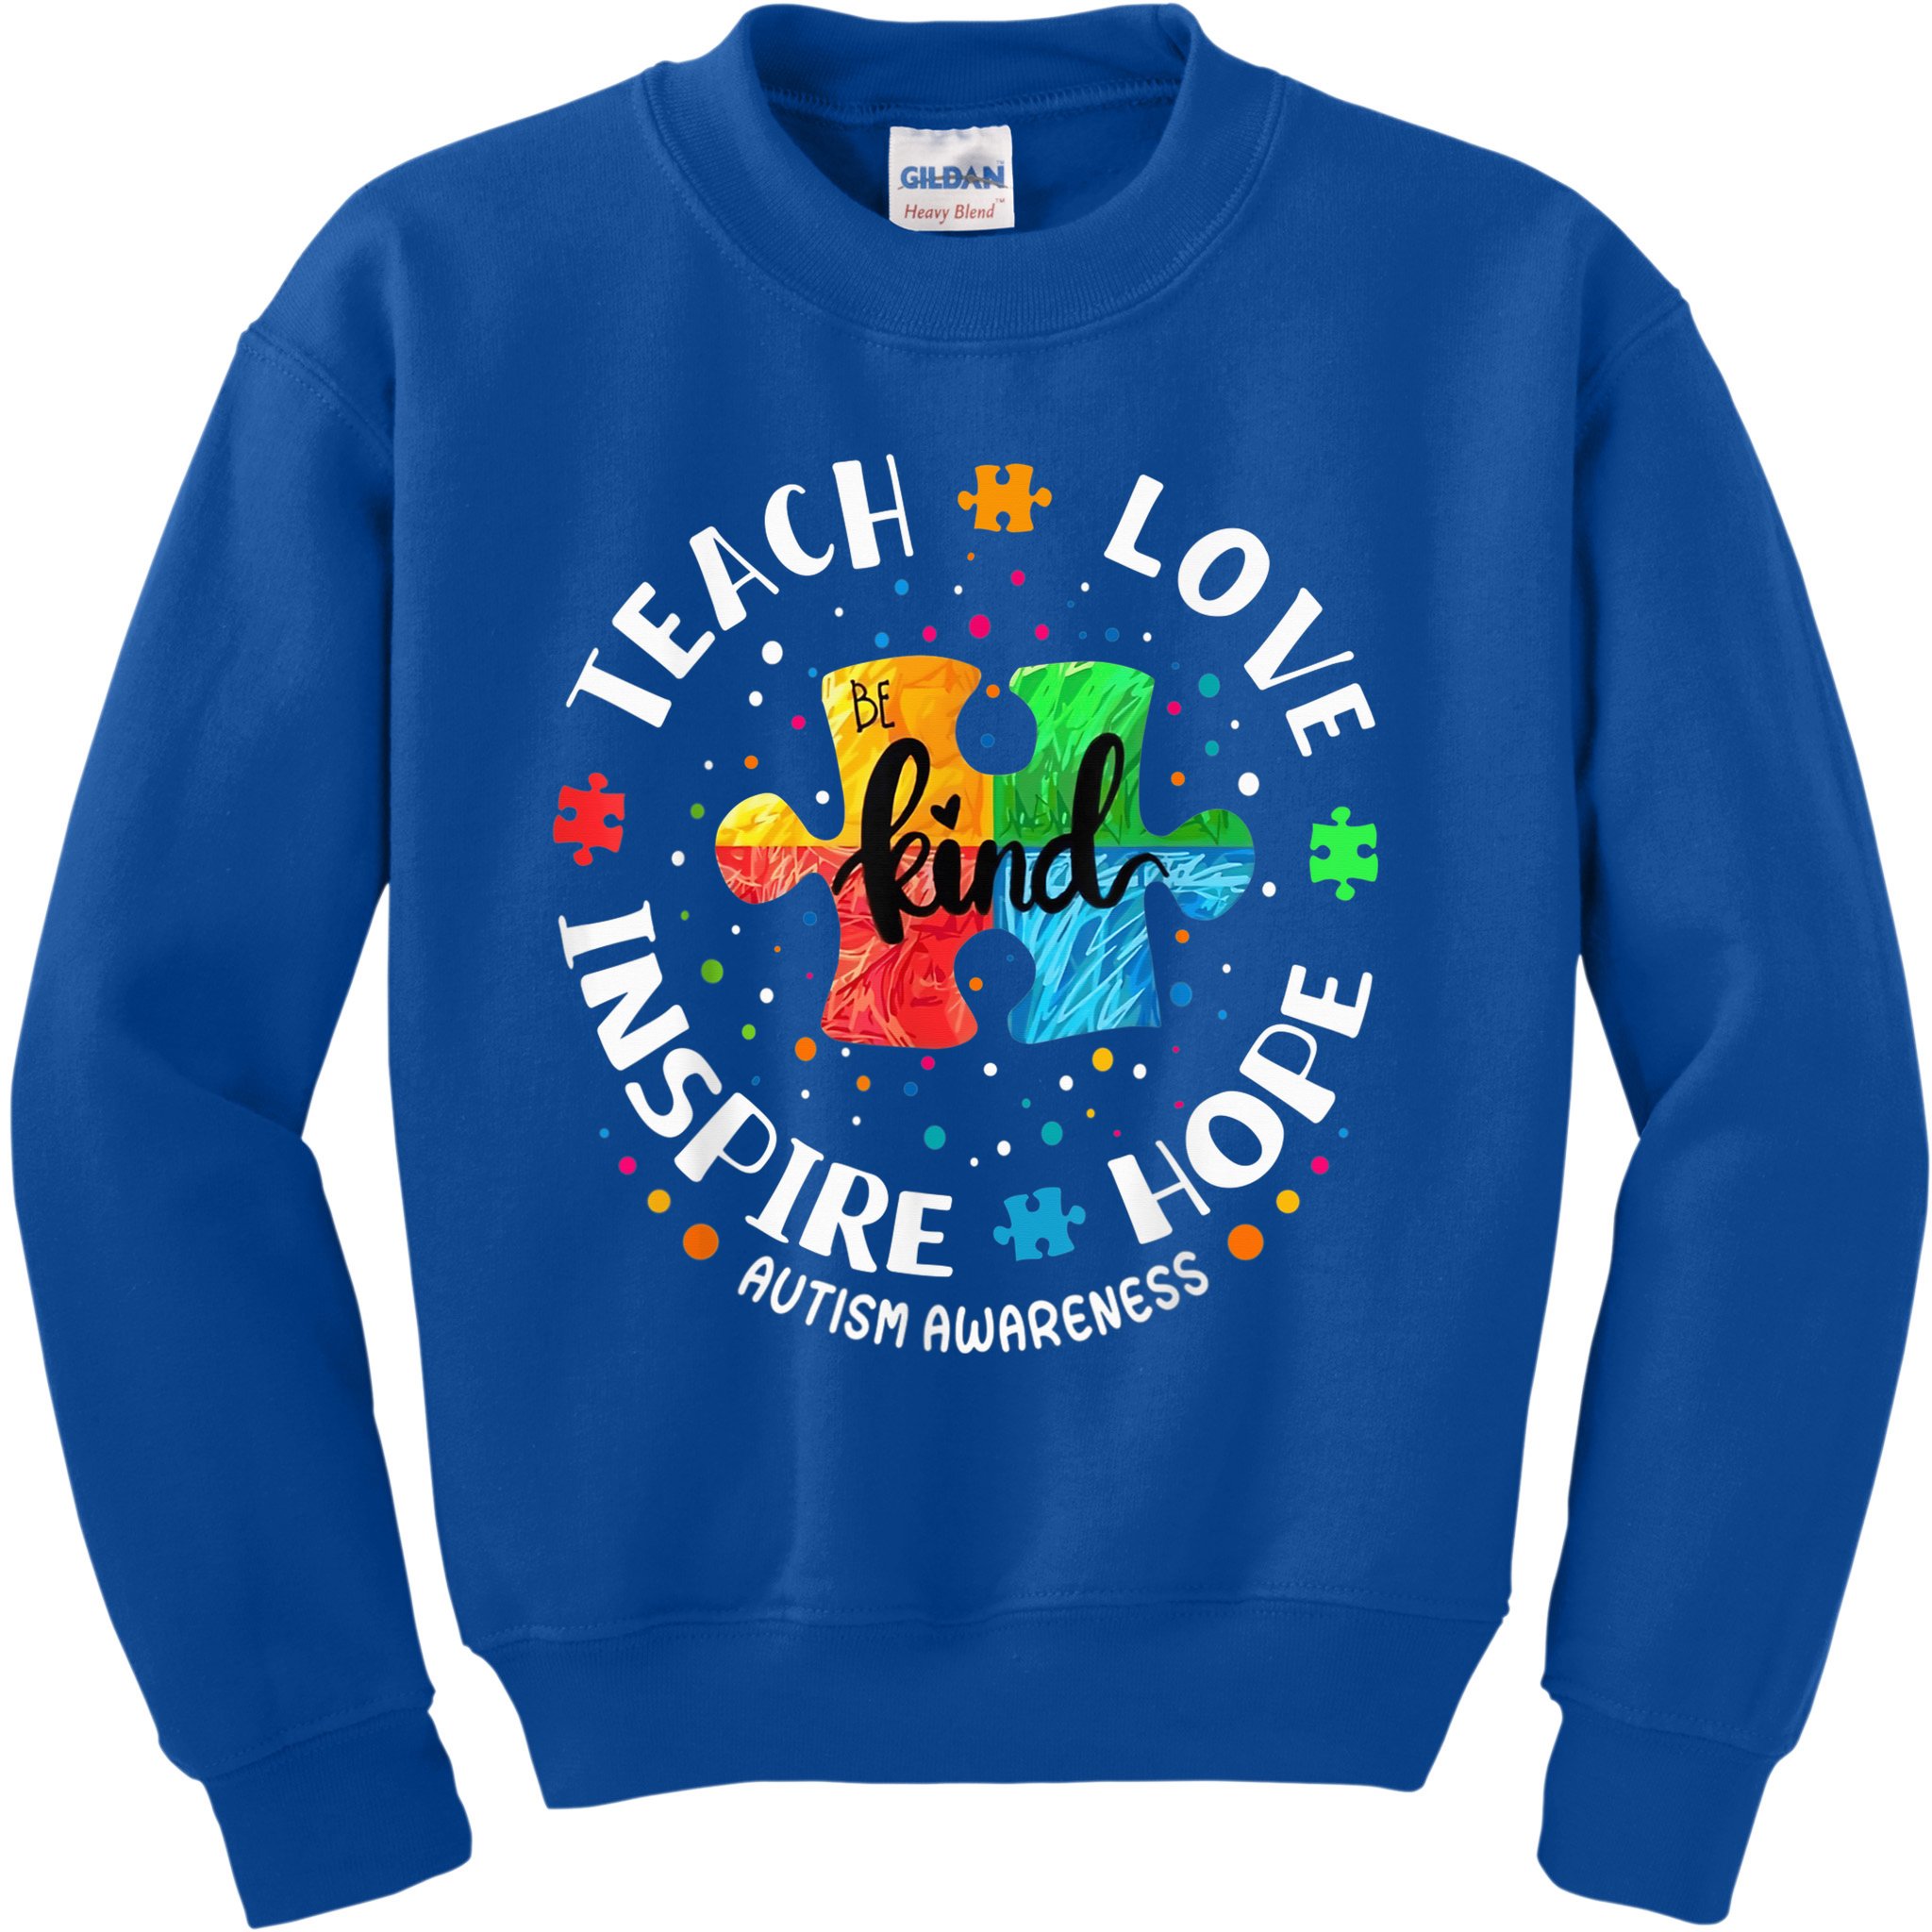 Autism Awareness Kids Pullover Hoodies for Sale